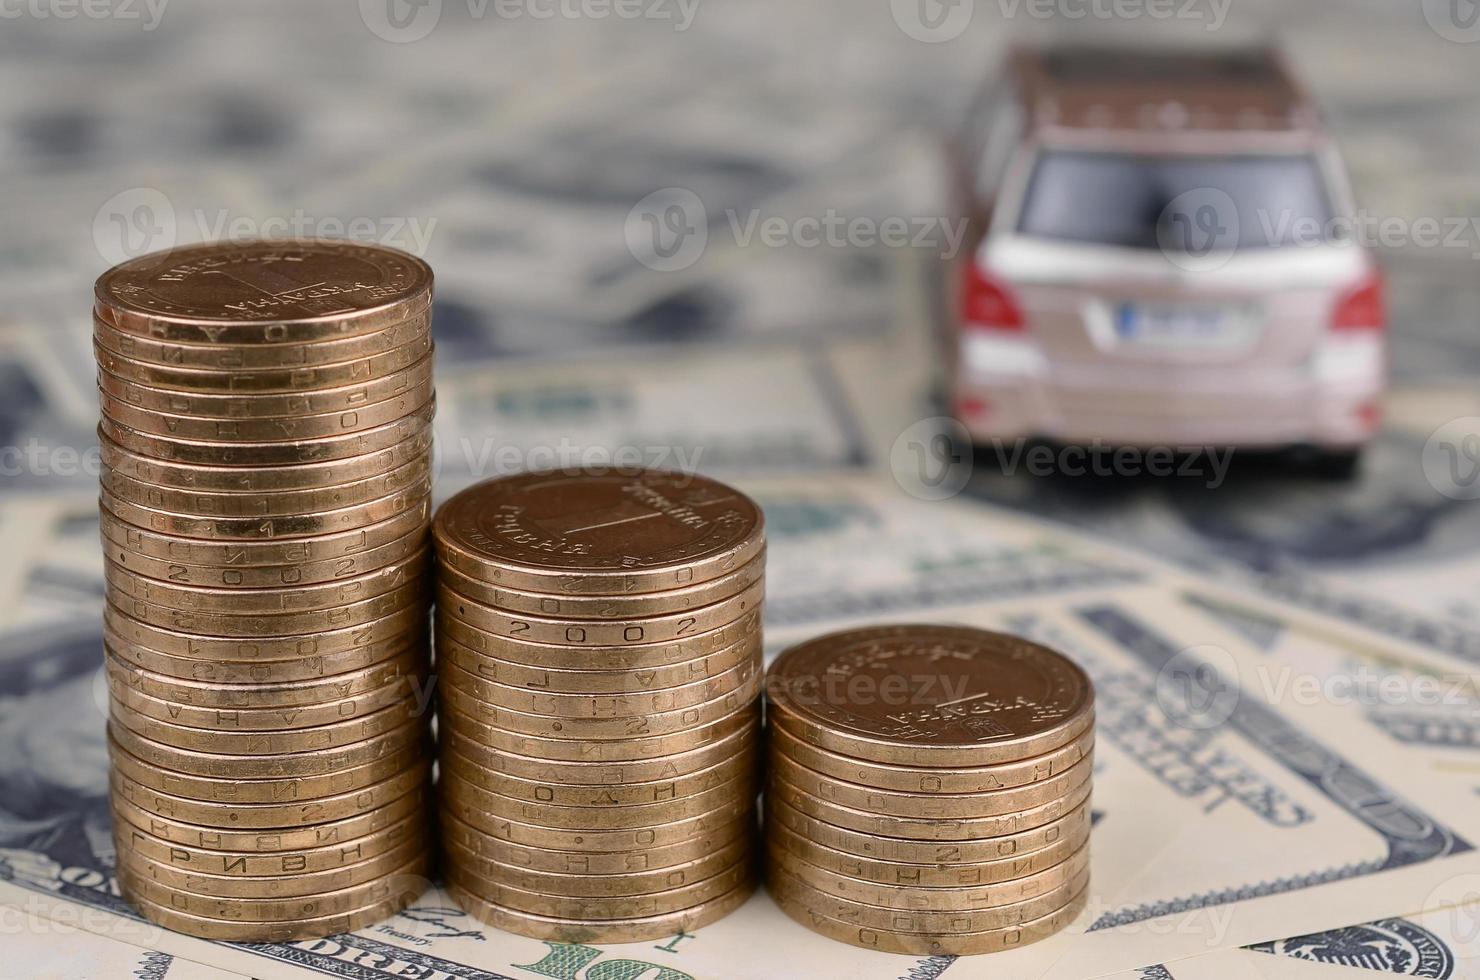 Toy car model at the stacks of golden coins lies on many dollar bills photo